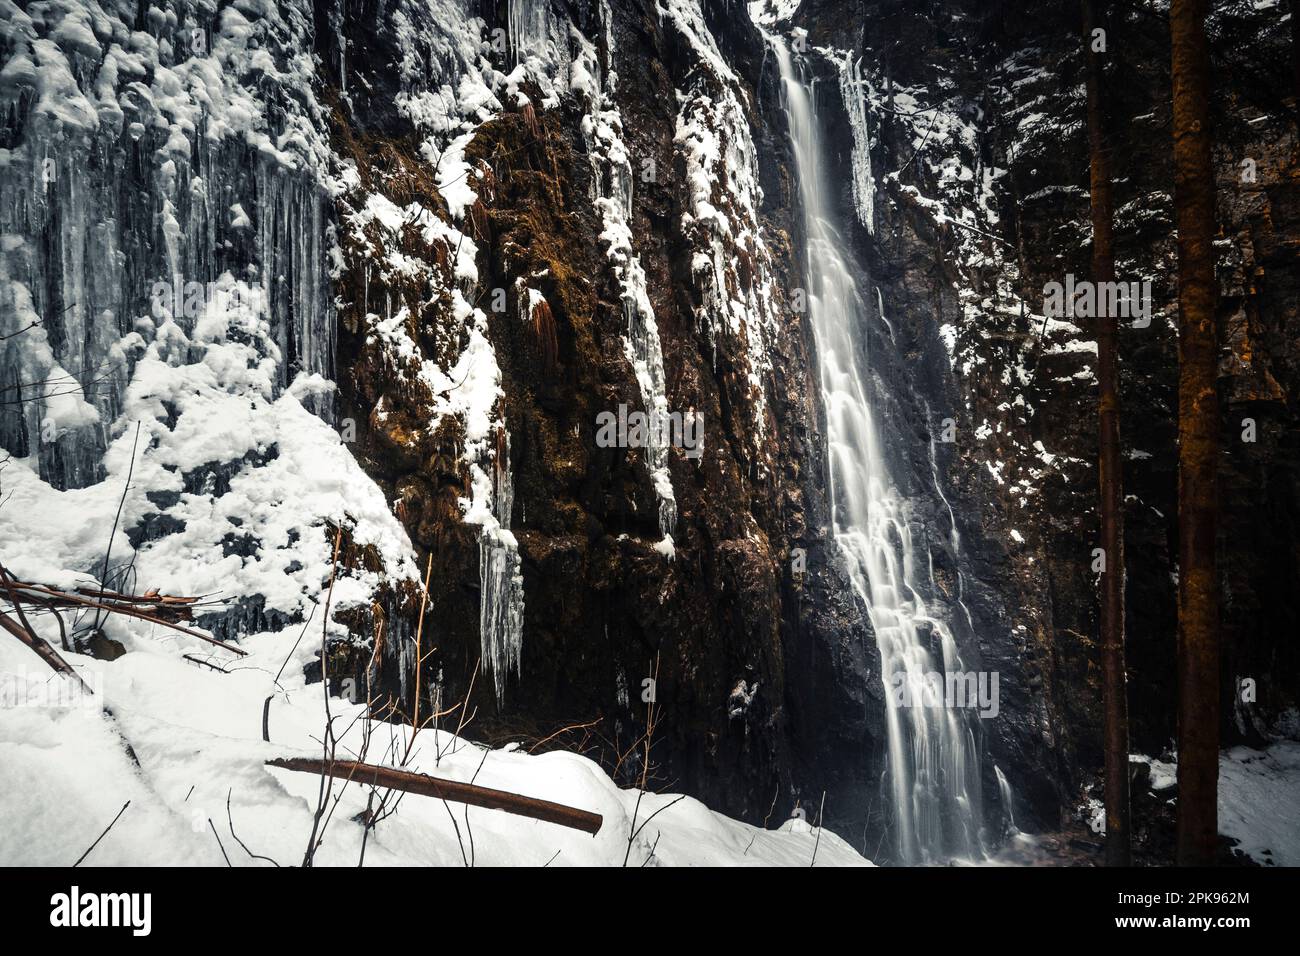 The Burgbach waterfall in Bad Rippoldsau-Schapbach, Black Forest, beautiful winter landscape with snow and ice Stock Photo